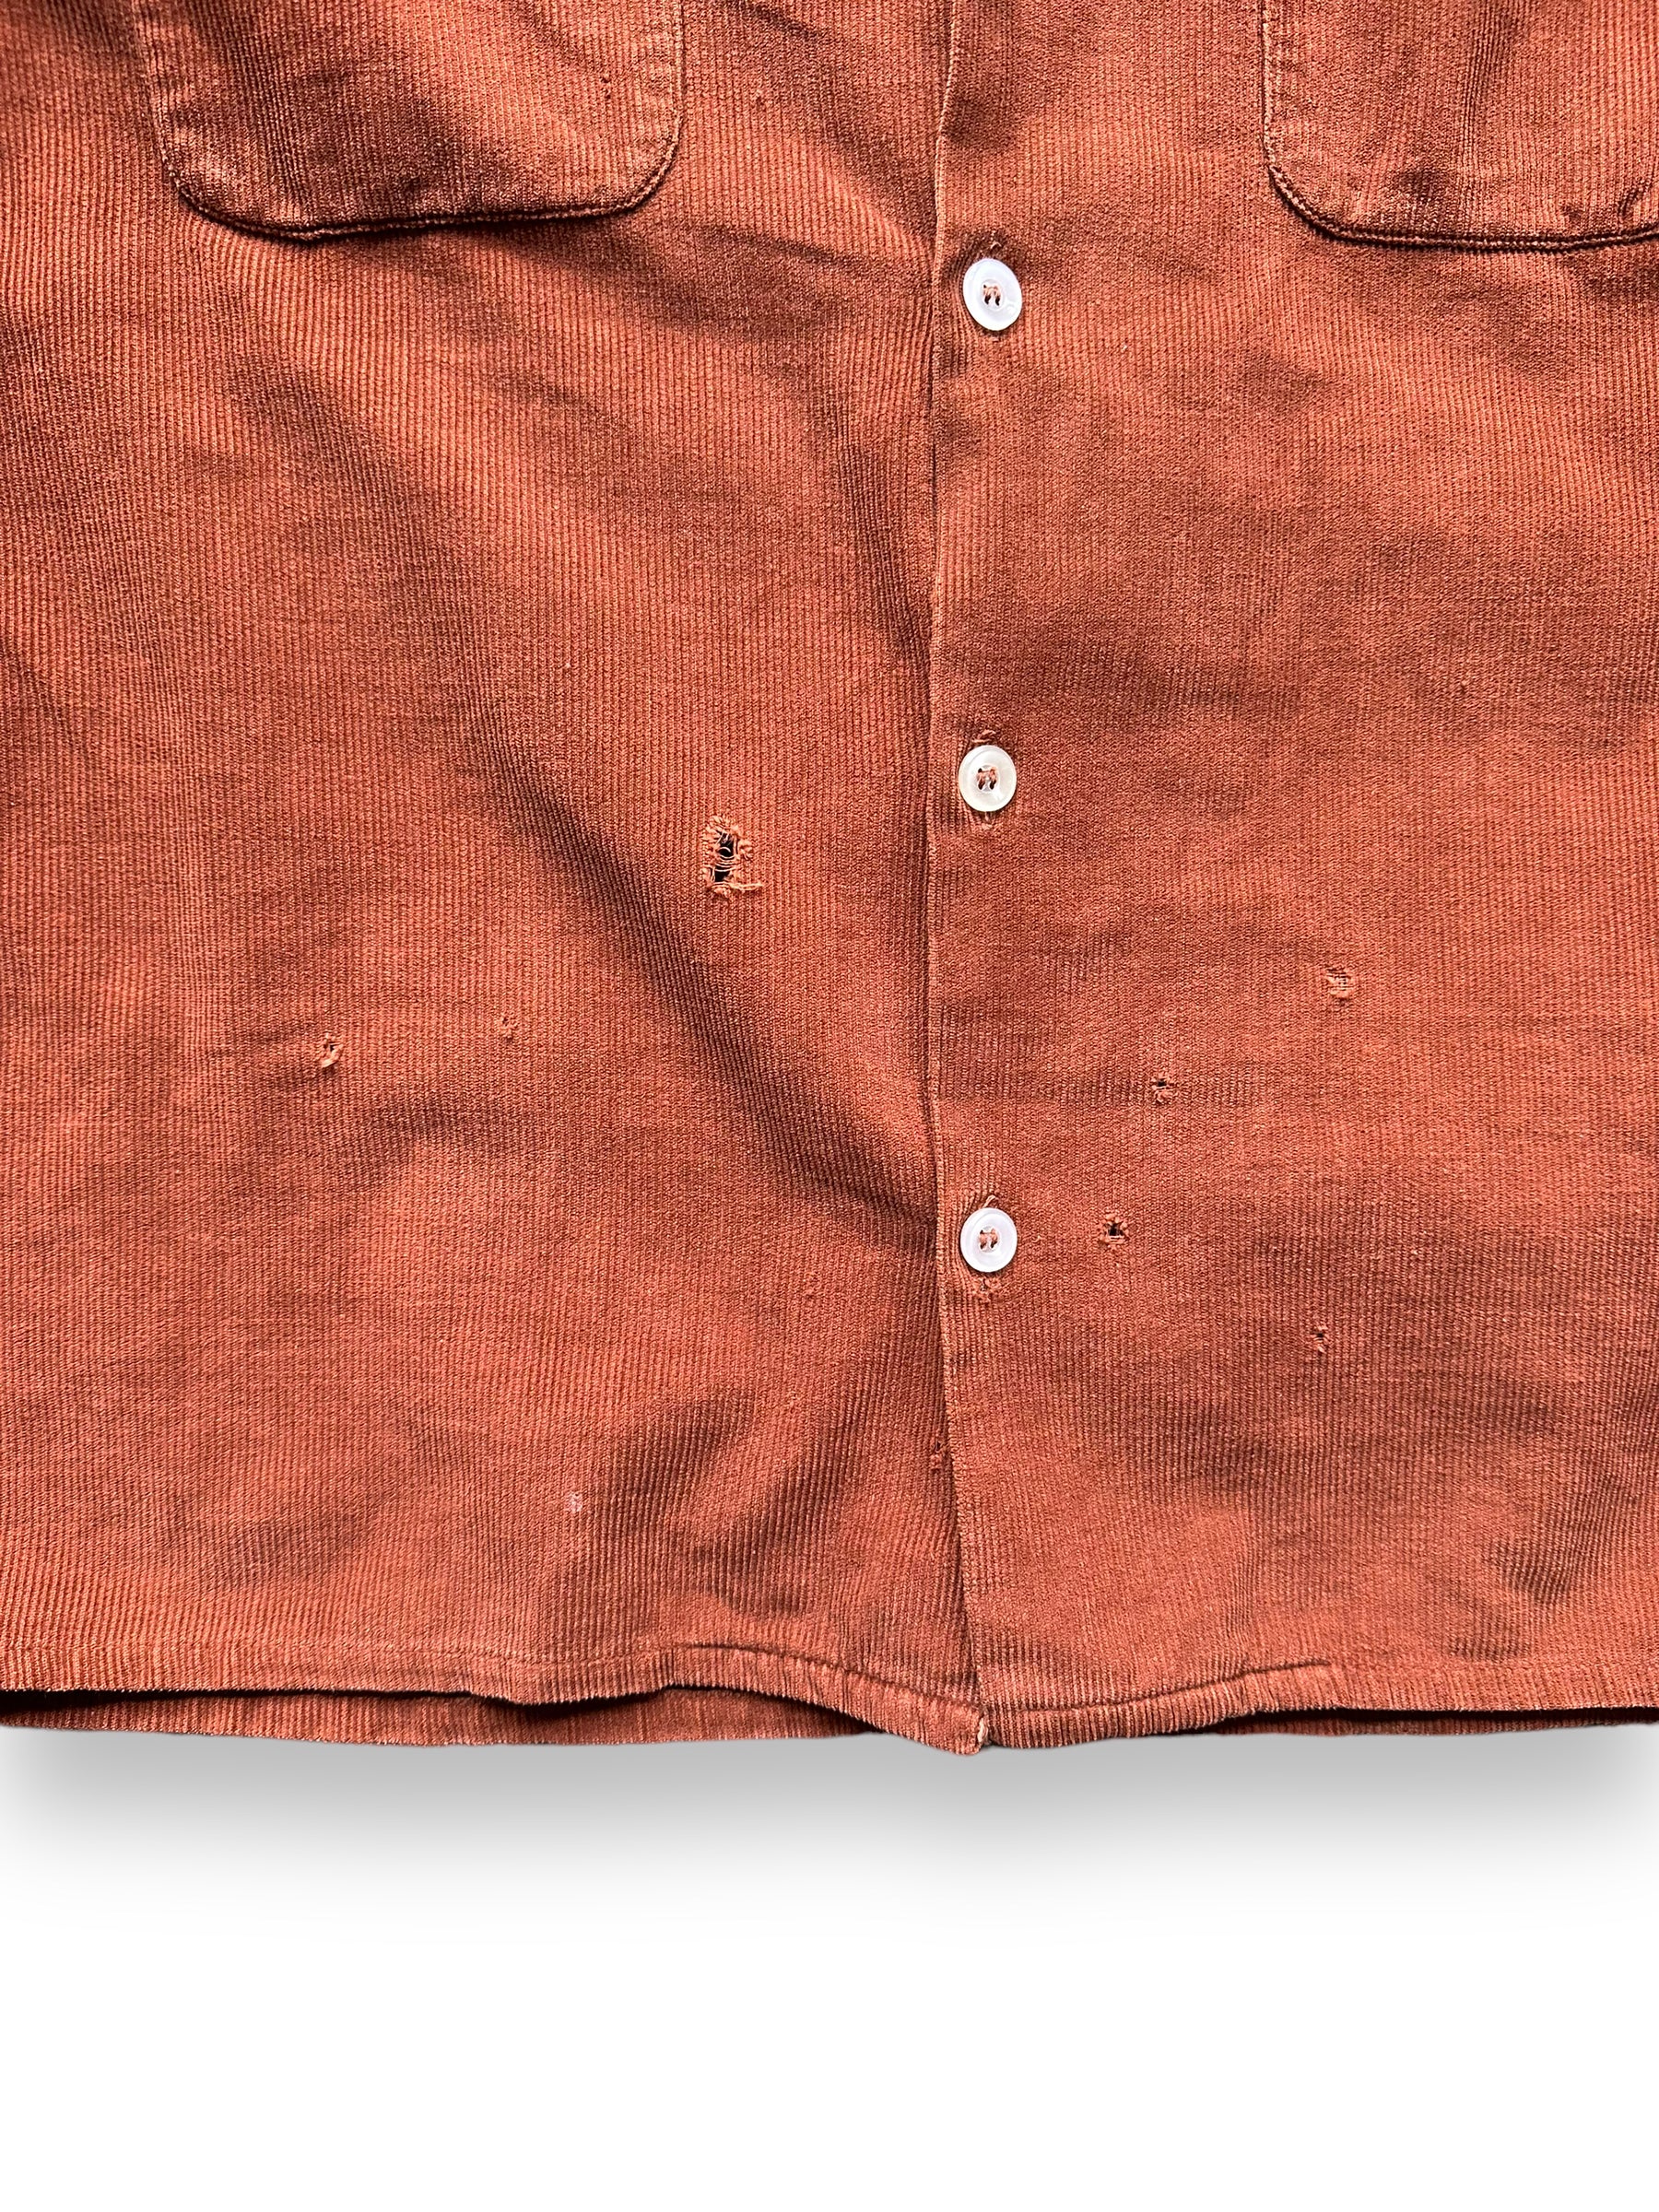 Small Holes on Lower Front of Vintage Rust Colored Corduroy Loop Collar Shirt  SZ M | Vintage Loop Collar Shirt Seattle | Barn Owl Vintage Seattle